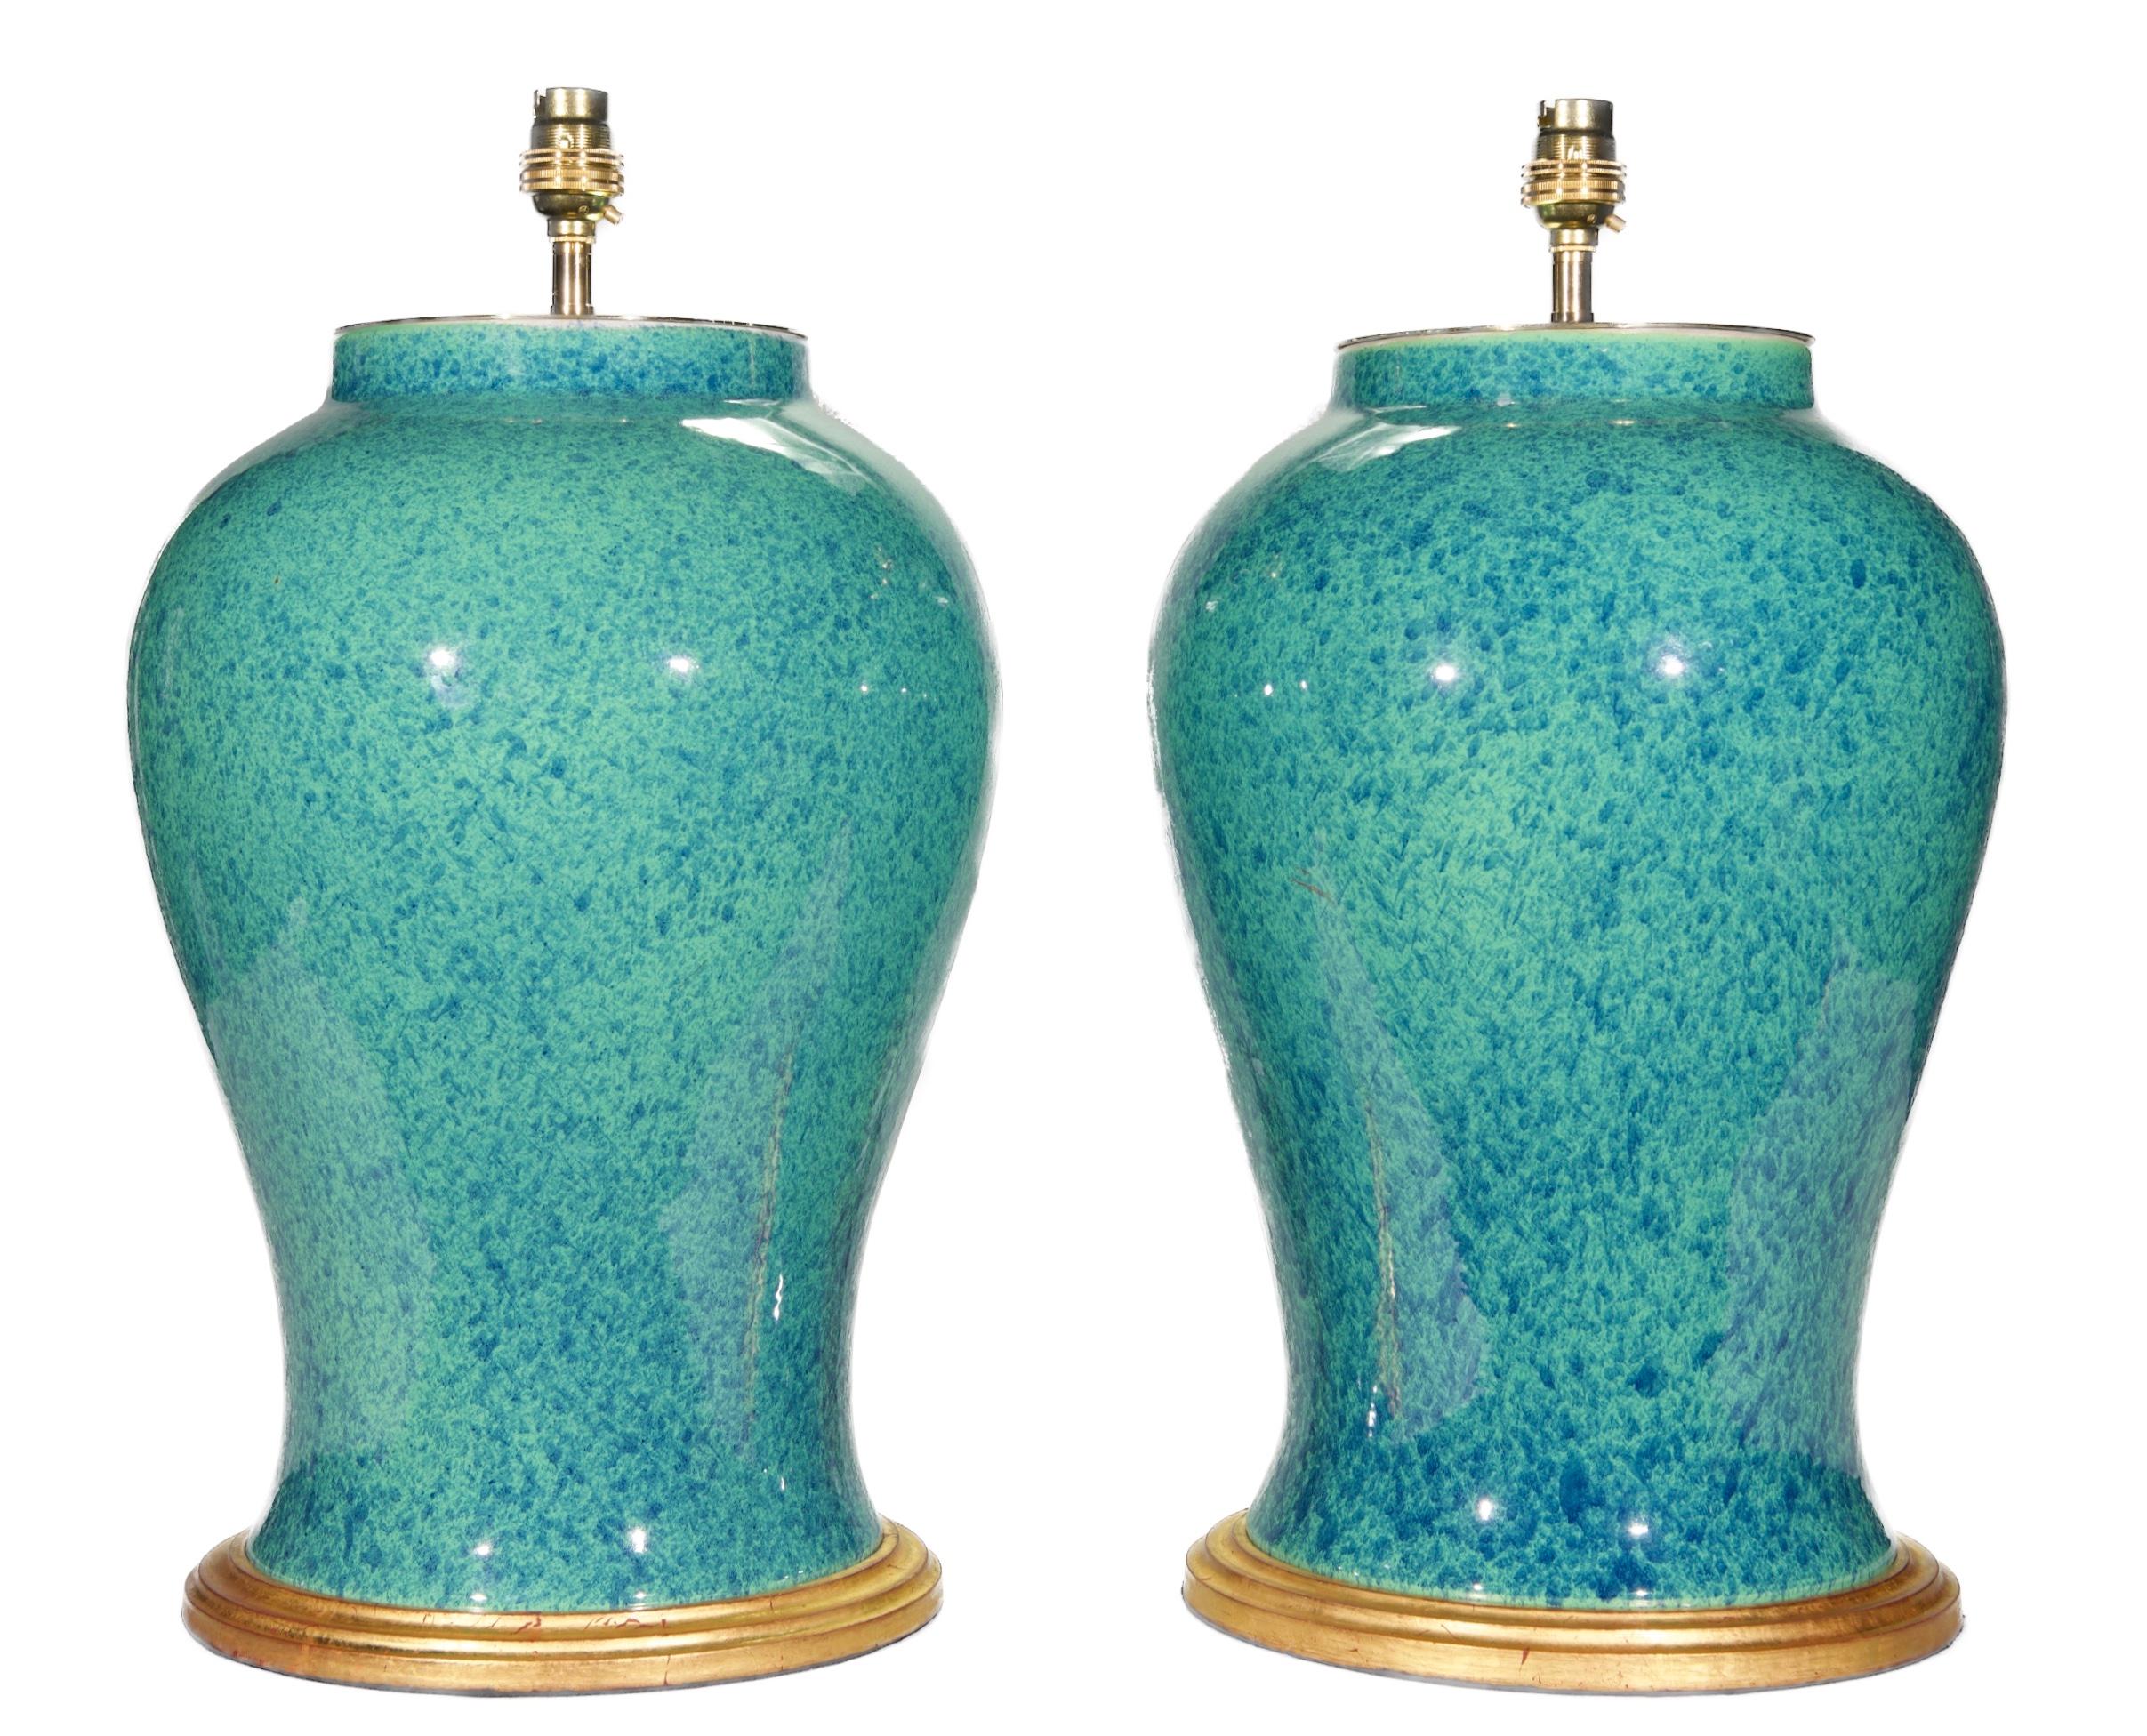 A fine pair of Chinese temple vases, decorated throughout in a wonderful deep speckled robin's egg blue glaze, now mounted as lamps with hand gilded bases.

Height of vases: 15 1/4 in (39 cm) including giltwood bases, excluding electrical fitments